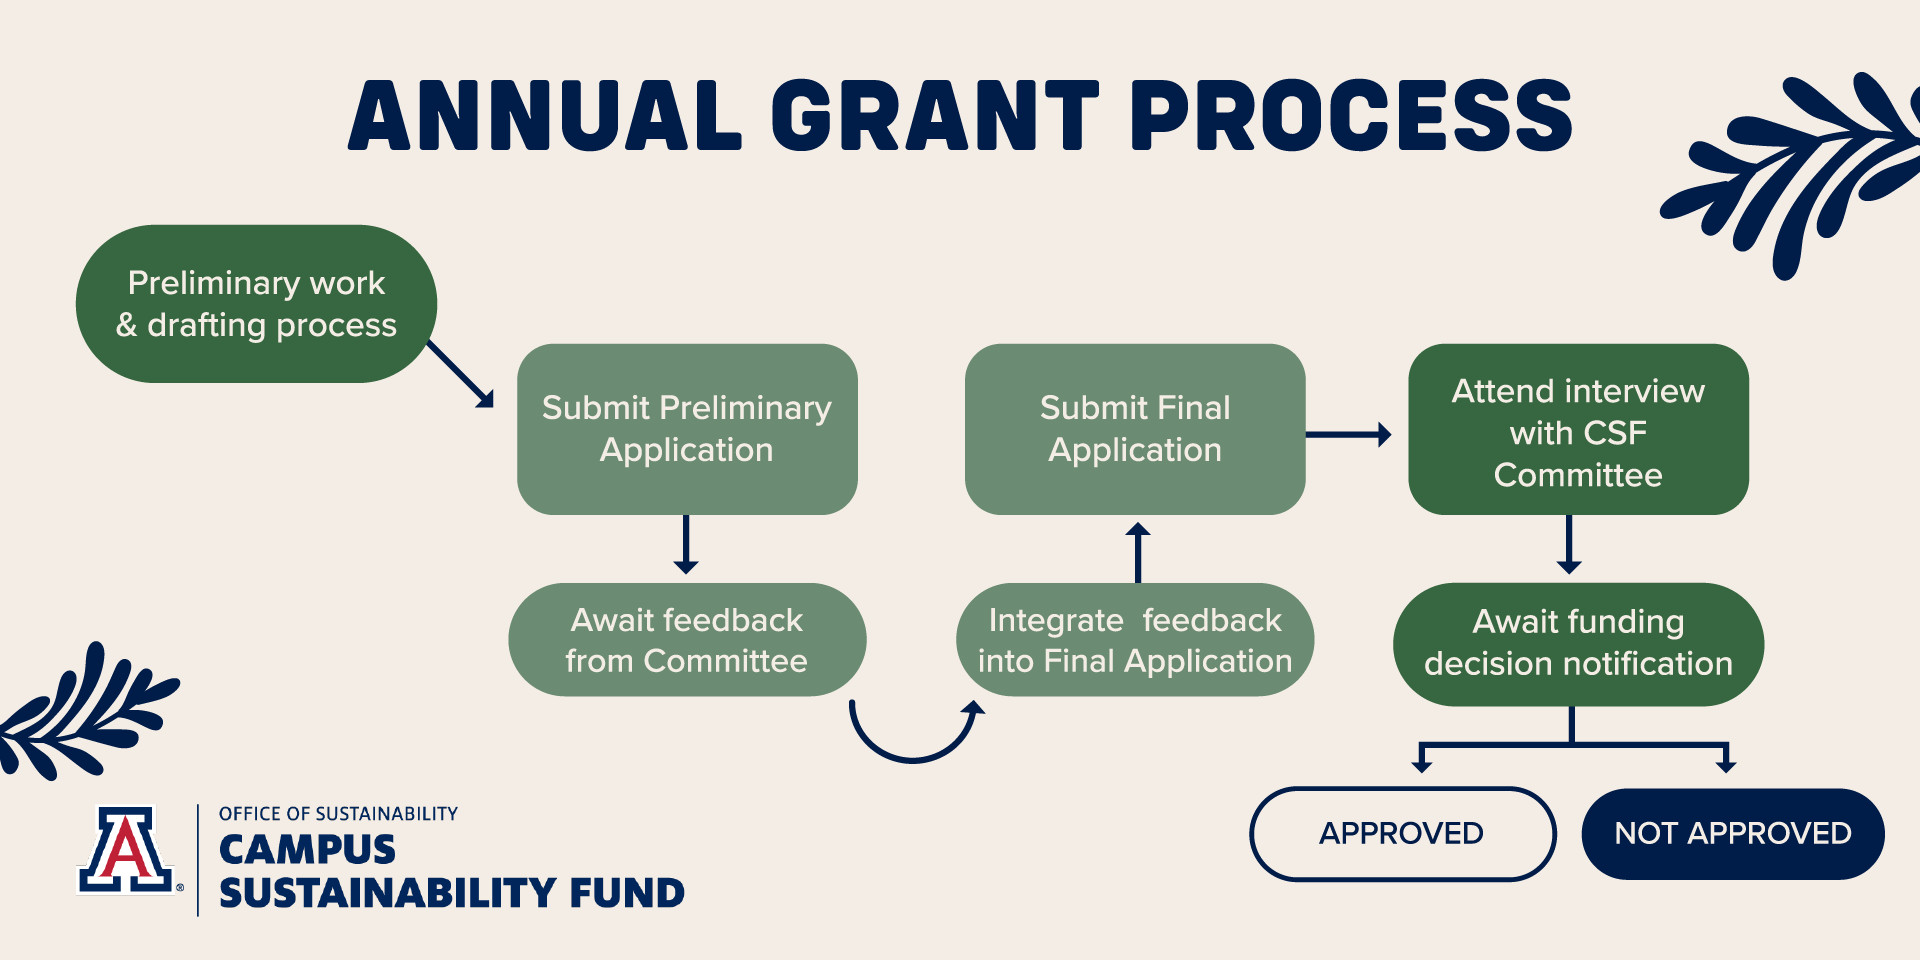 Chart that shows the process for submitting an annual grant. The steps are the same as numbered above. 